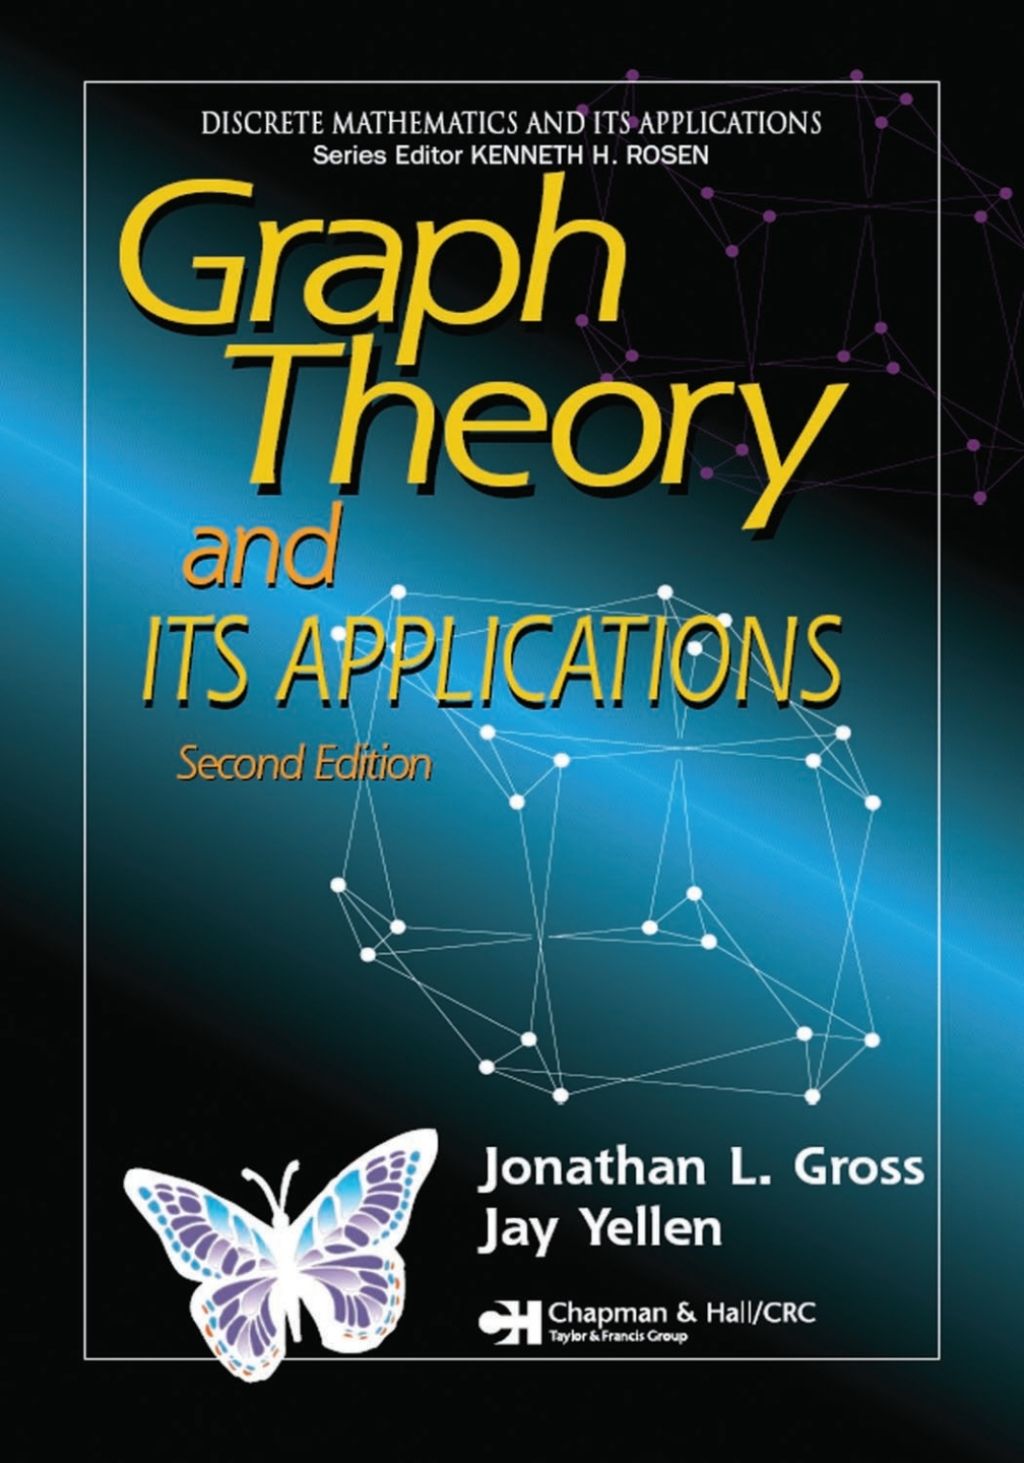 graph-theory-and-its-applications-2nd-edition-author-jonathan-l-gross-jay-yellen-publisher-crc-press-i-llc2022-02-21-070127.jpg